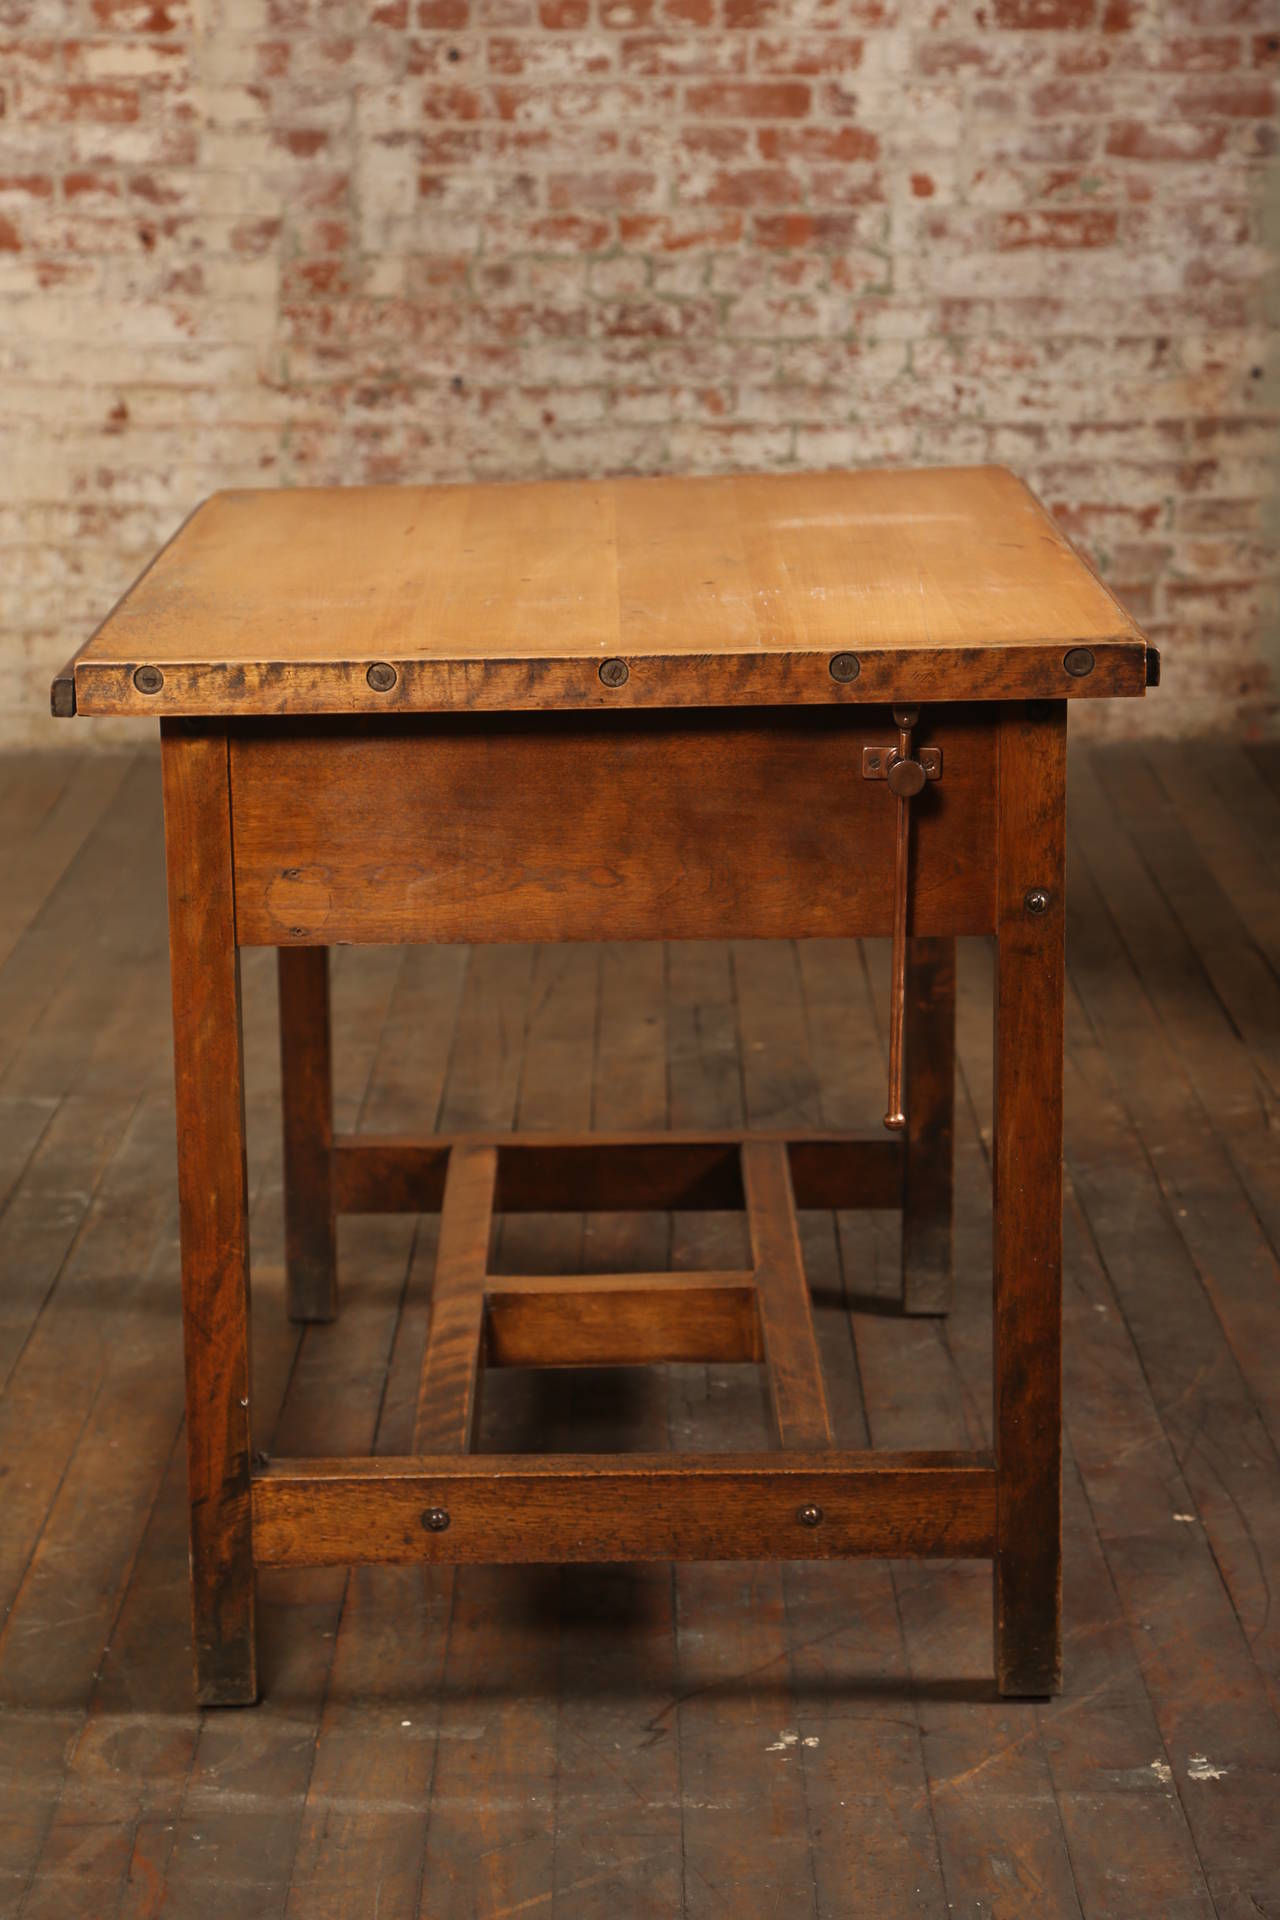 Wood Vintage Industrial Drafting Table or Desk with Drawer